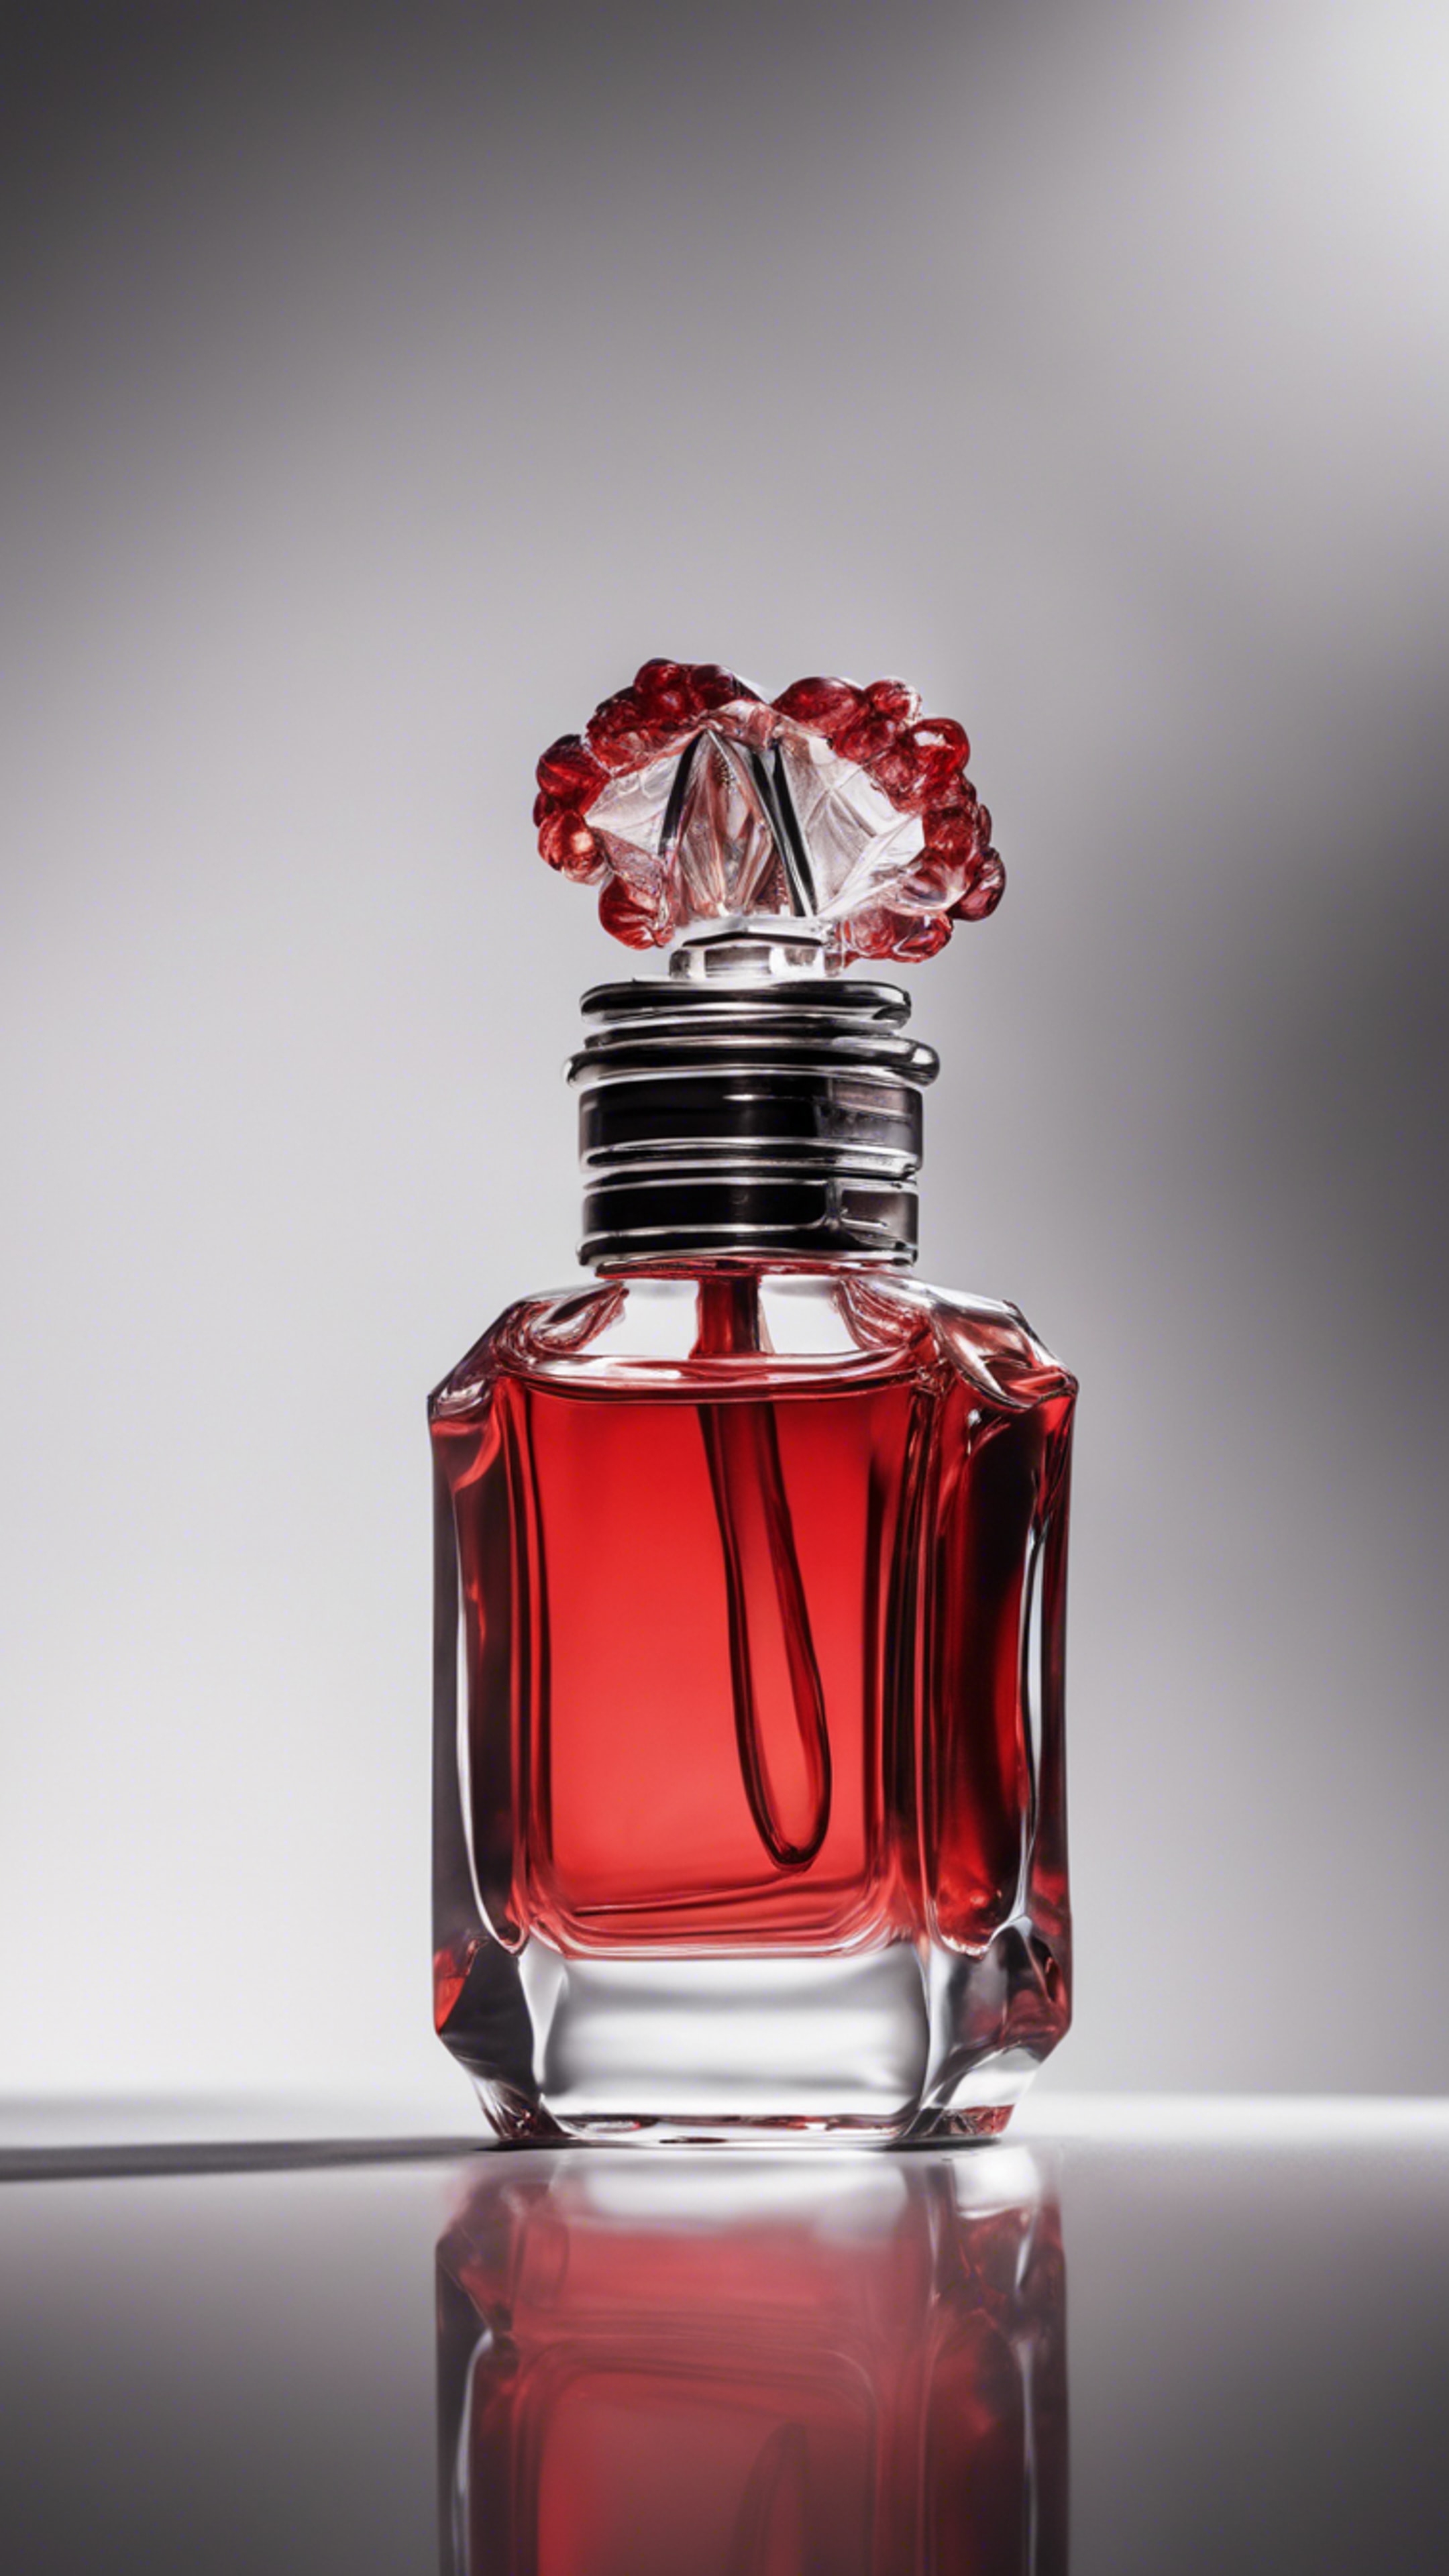 The portrait of a sassy red perfume bottle clashing against a pure white backdrop. Hintergrund[8445b62606744831bb5a]